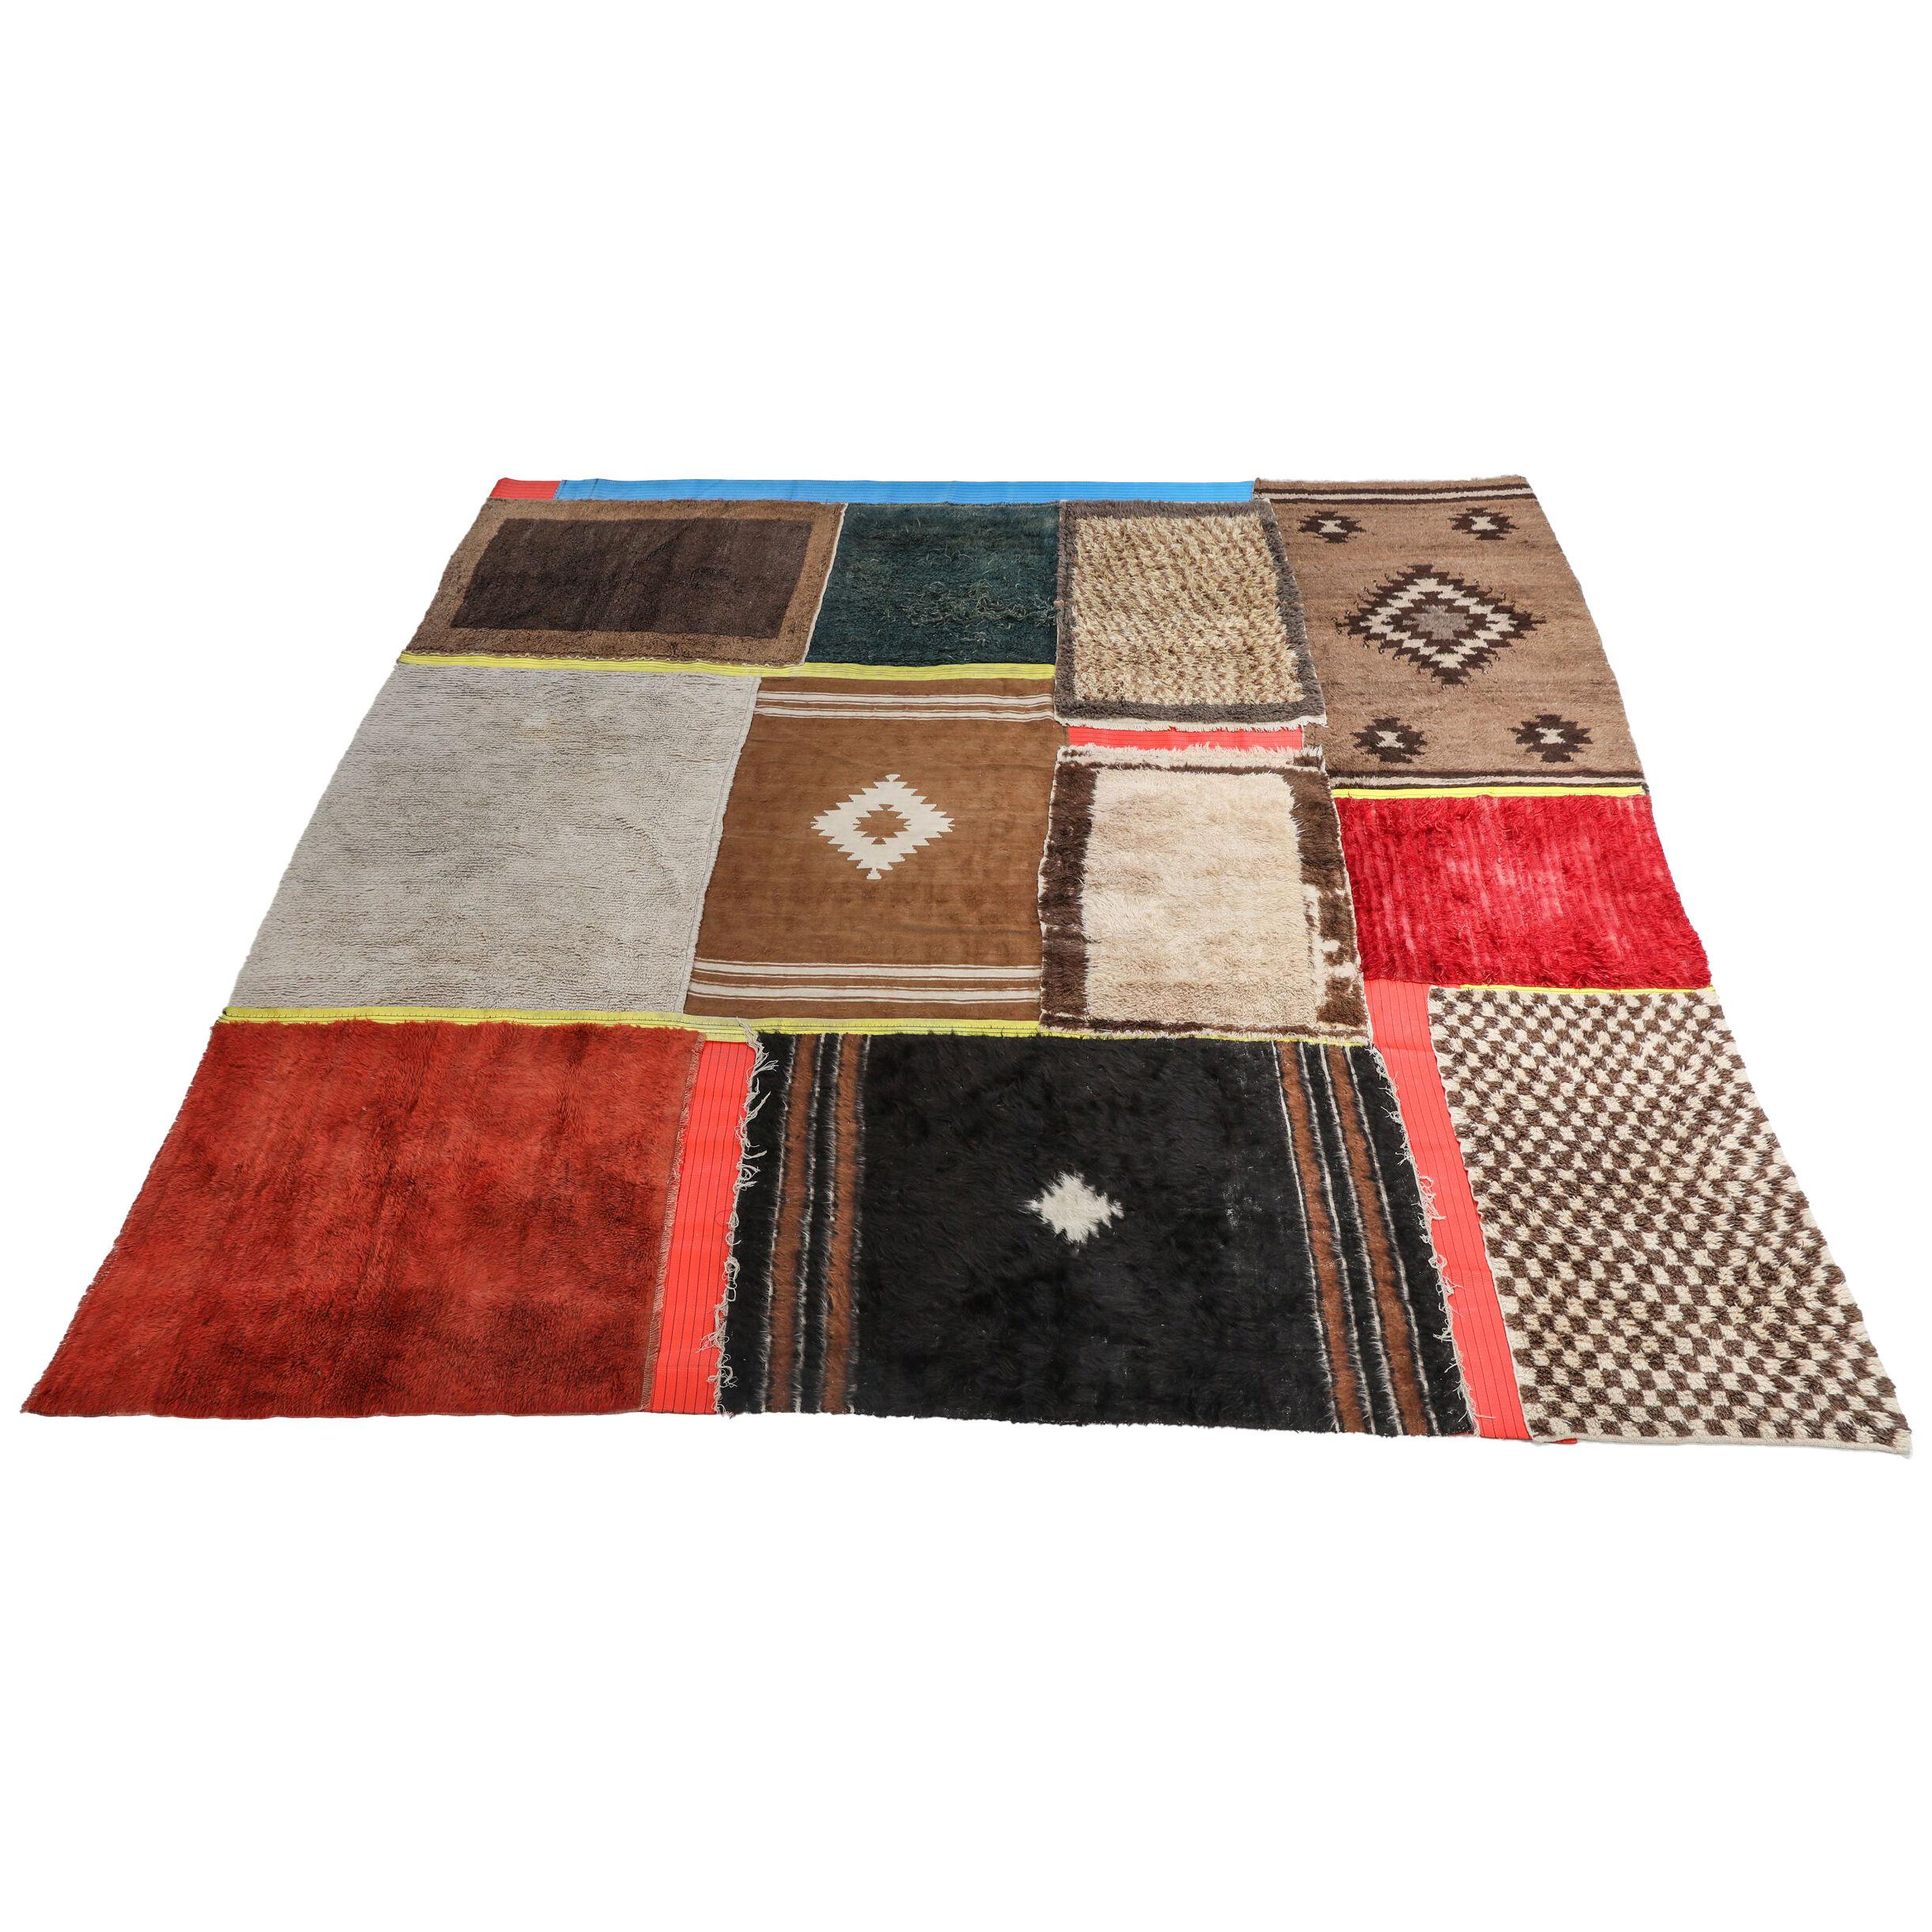 Contemporary Carpet 'Turkish delight' by Lionel Jadot - 2021